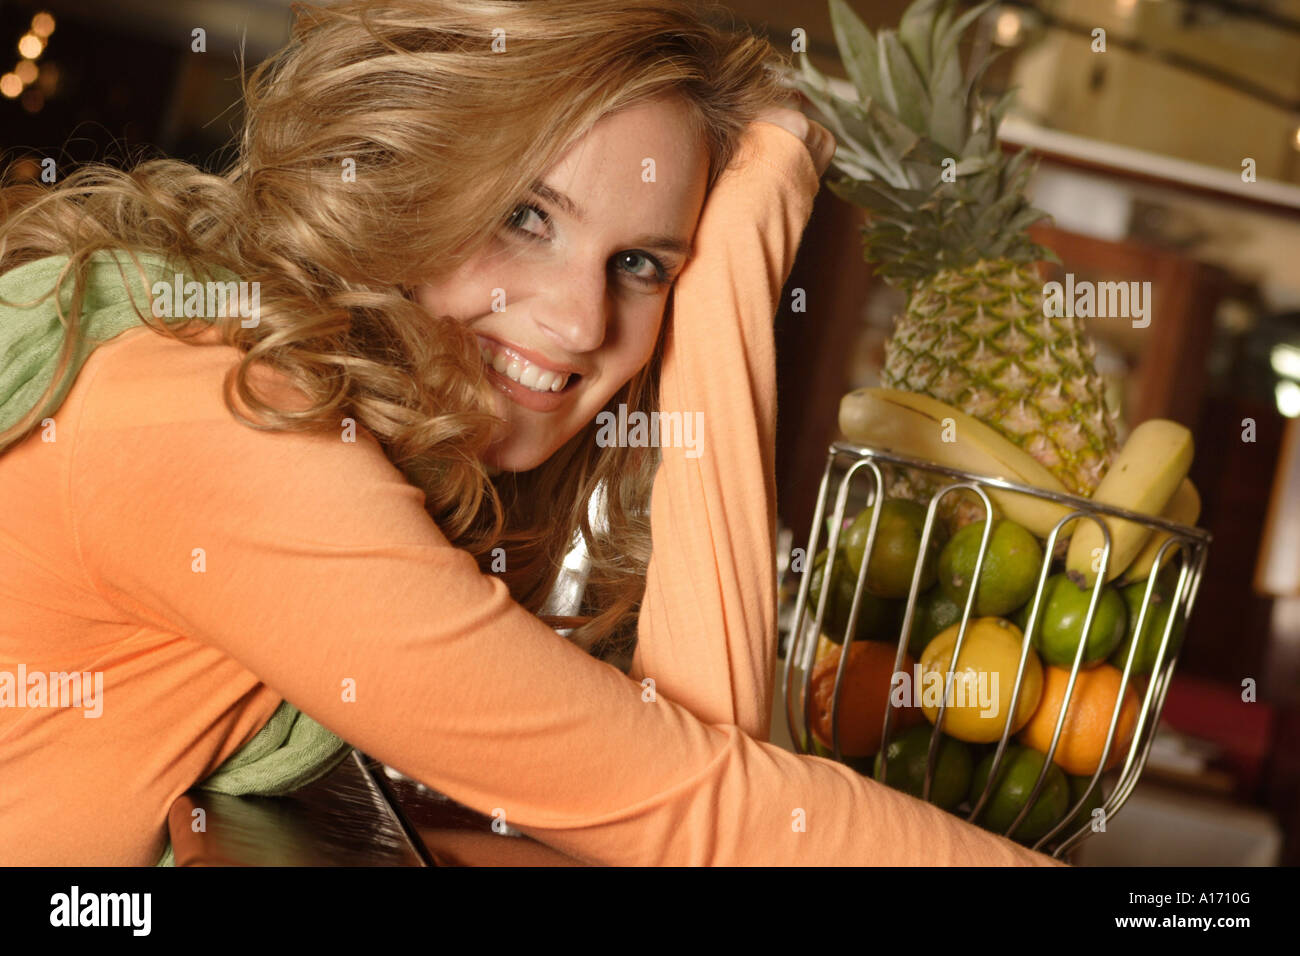 portrait of laughing woman Stock Photo